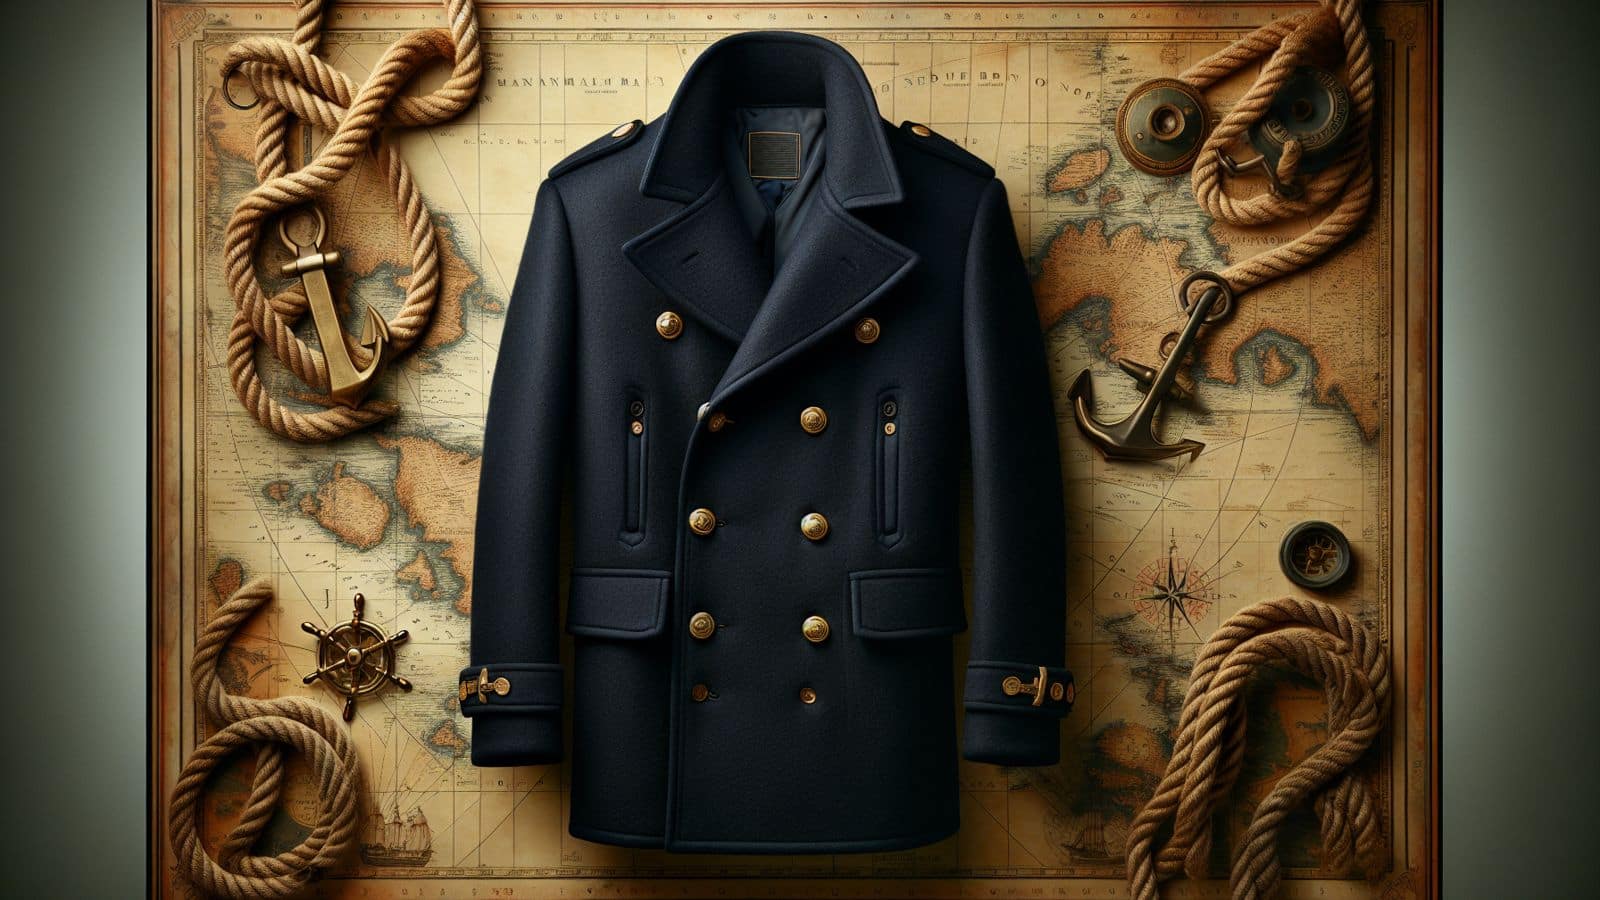 Understanding the timeless appeal of the pea coat